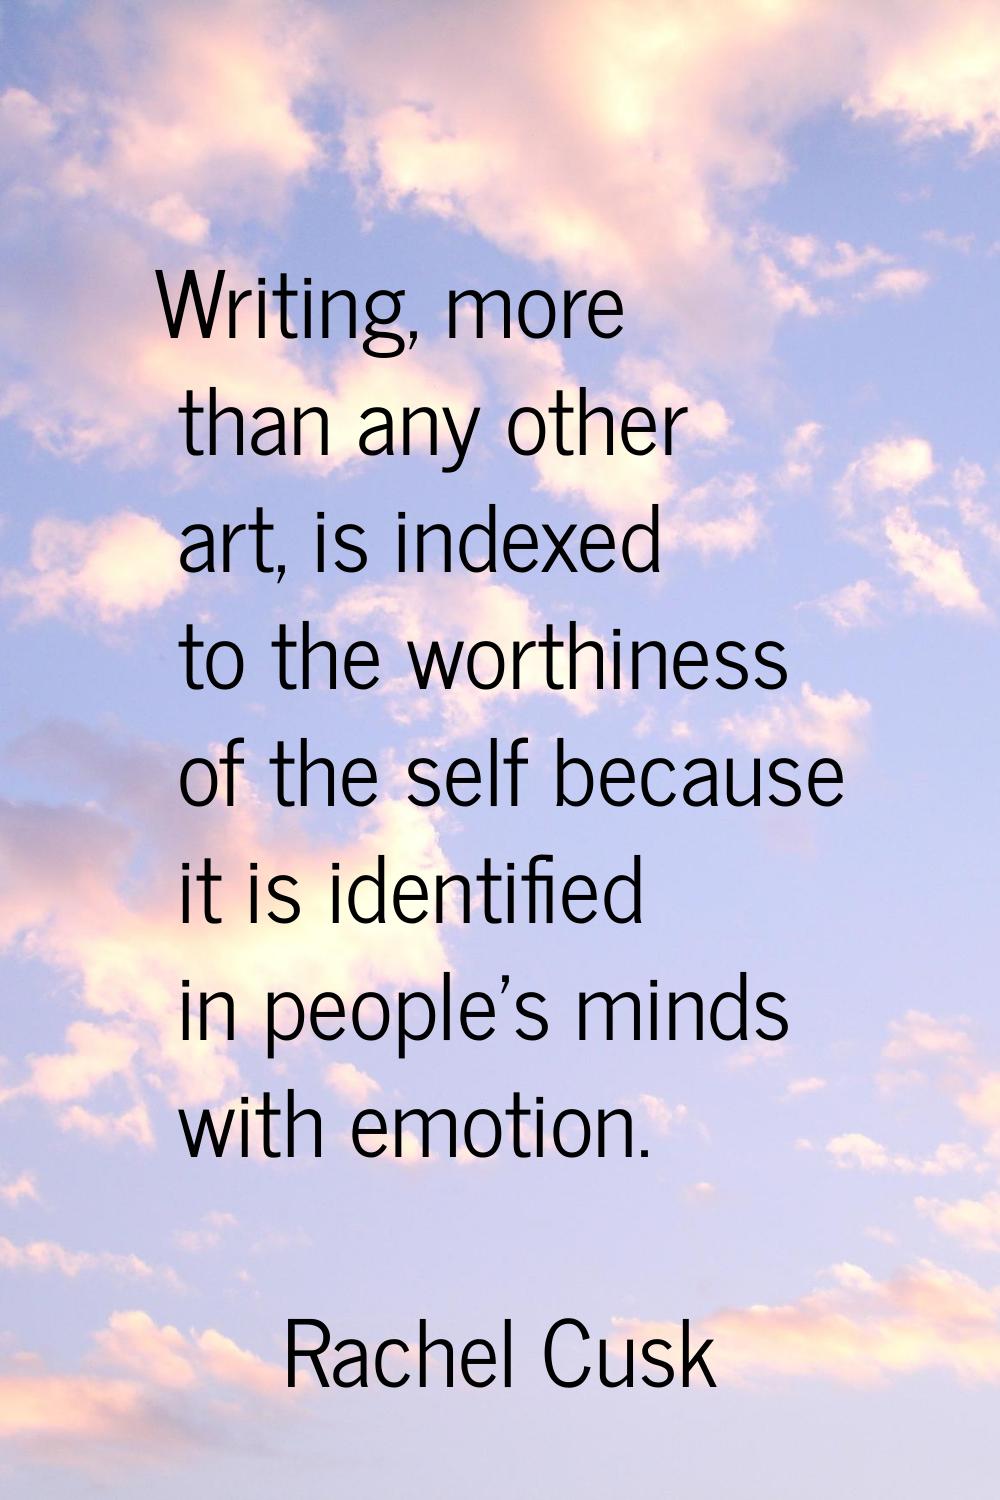 Writing, more than any other art, is indexed to the worthiness of the self because it is identified